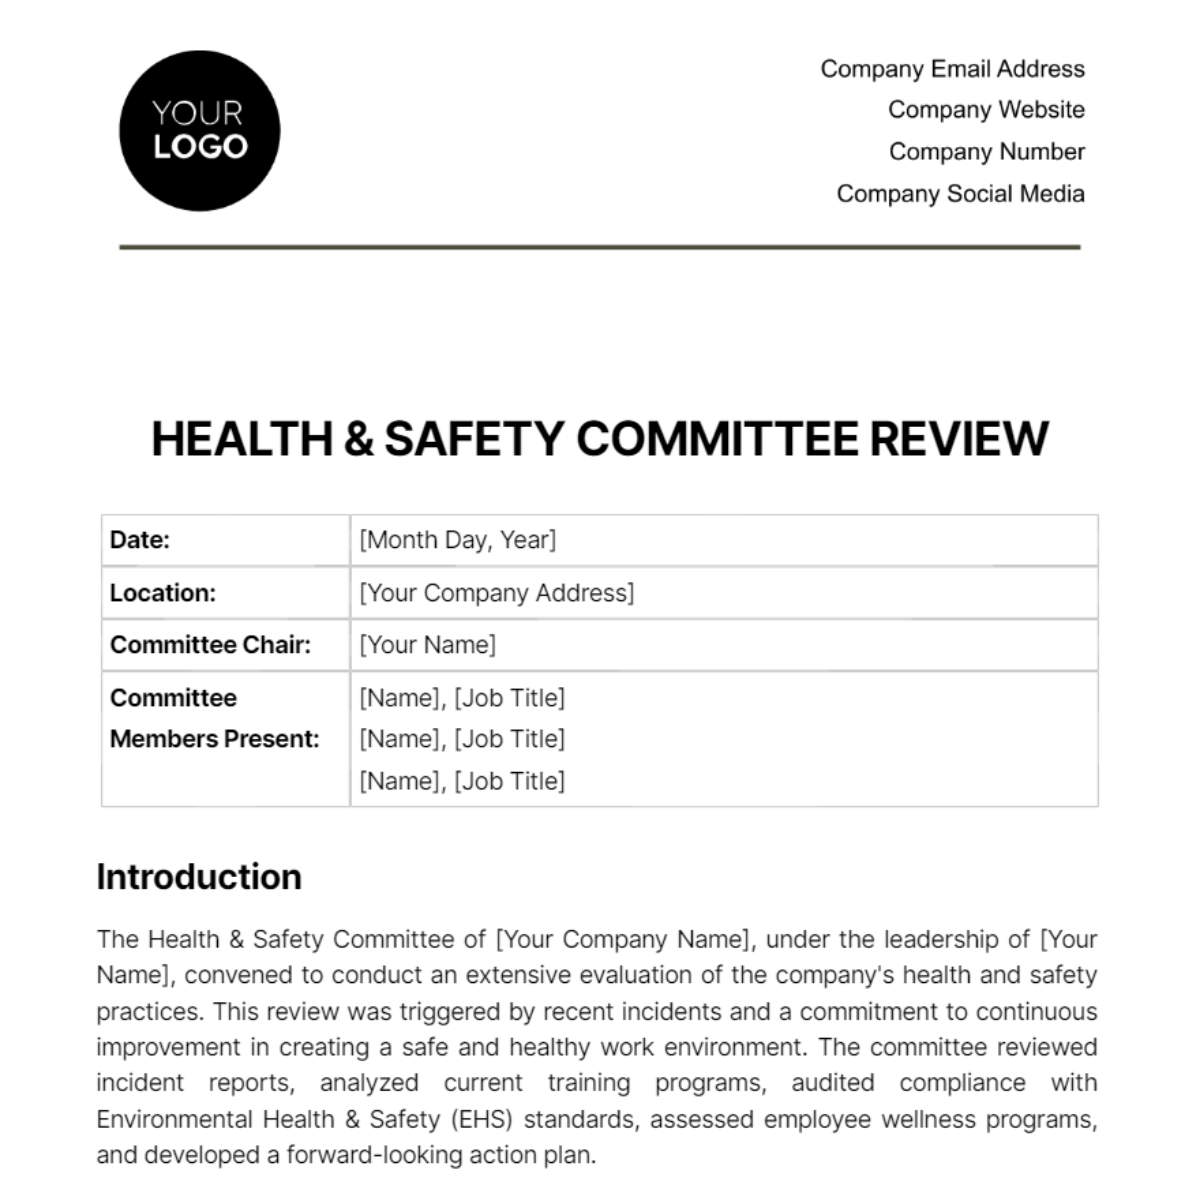 Health & Safety Committee Review Template